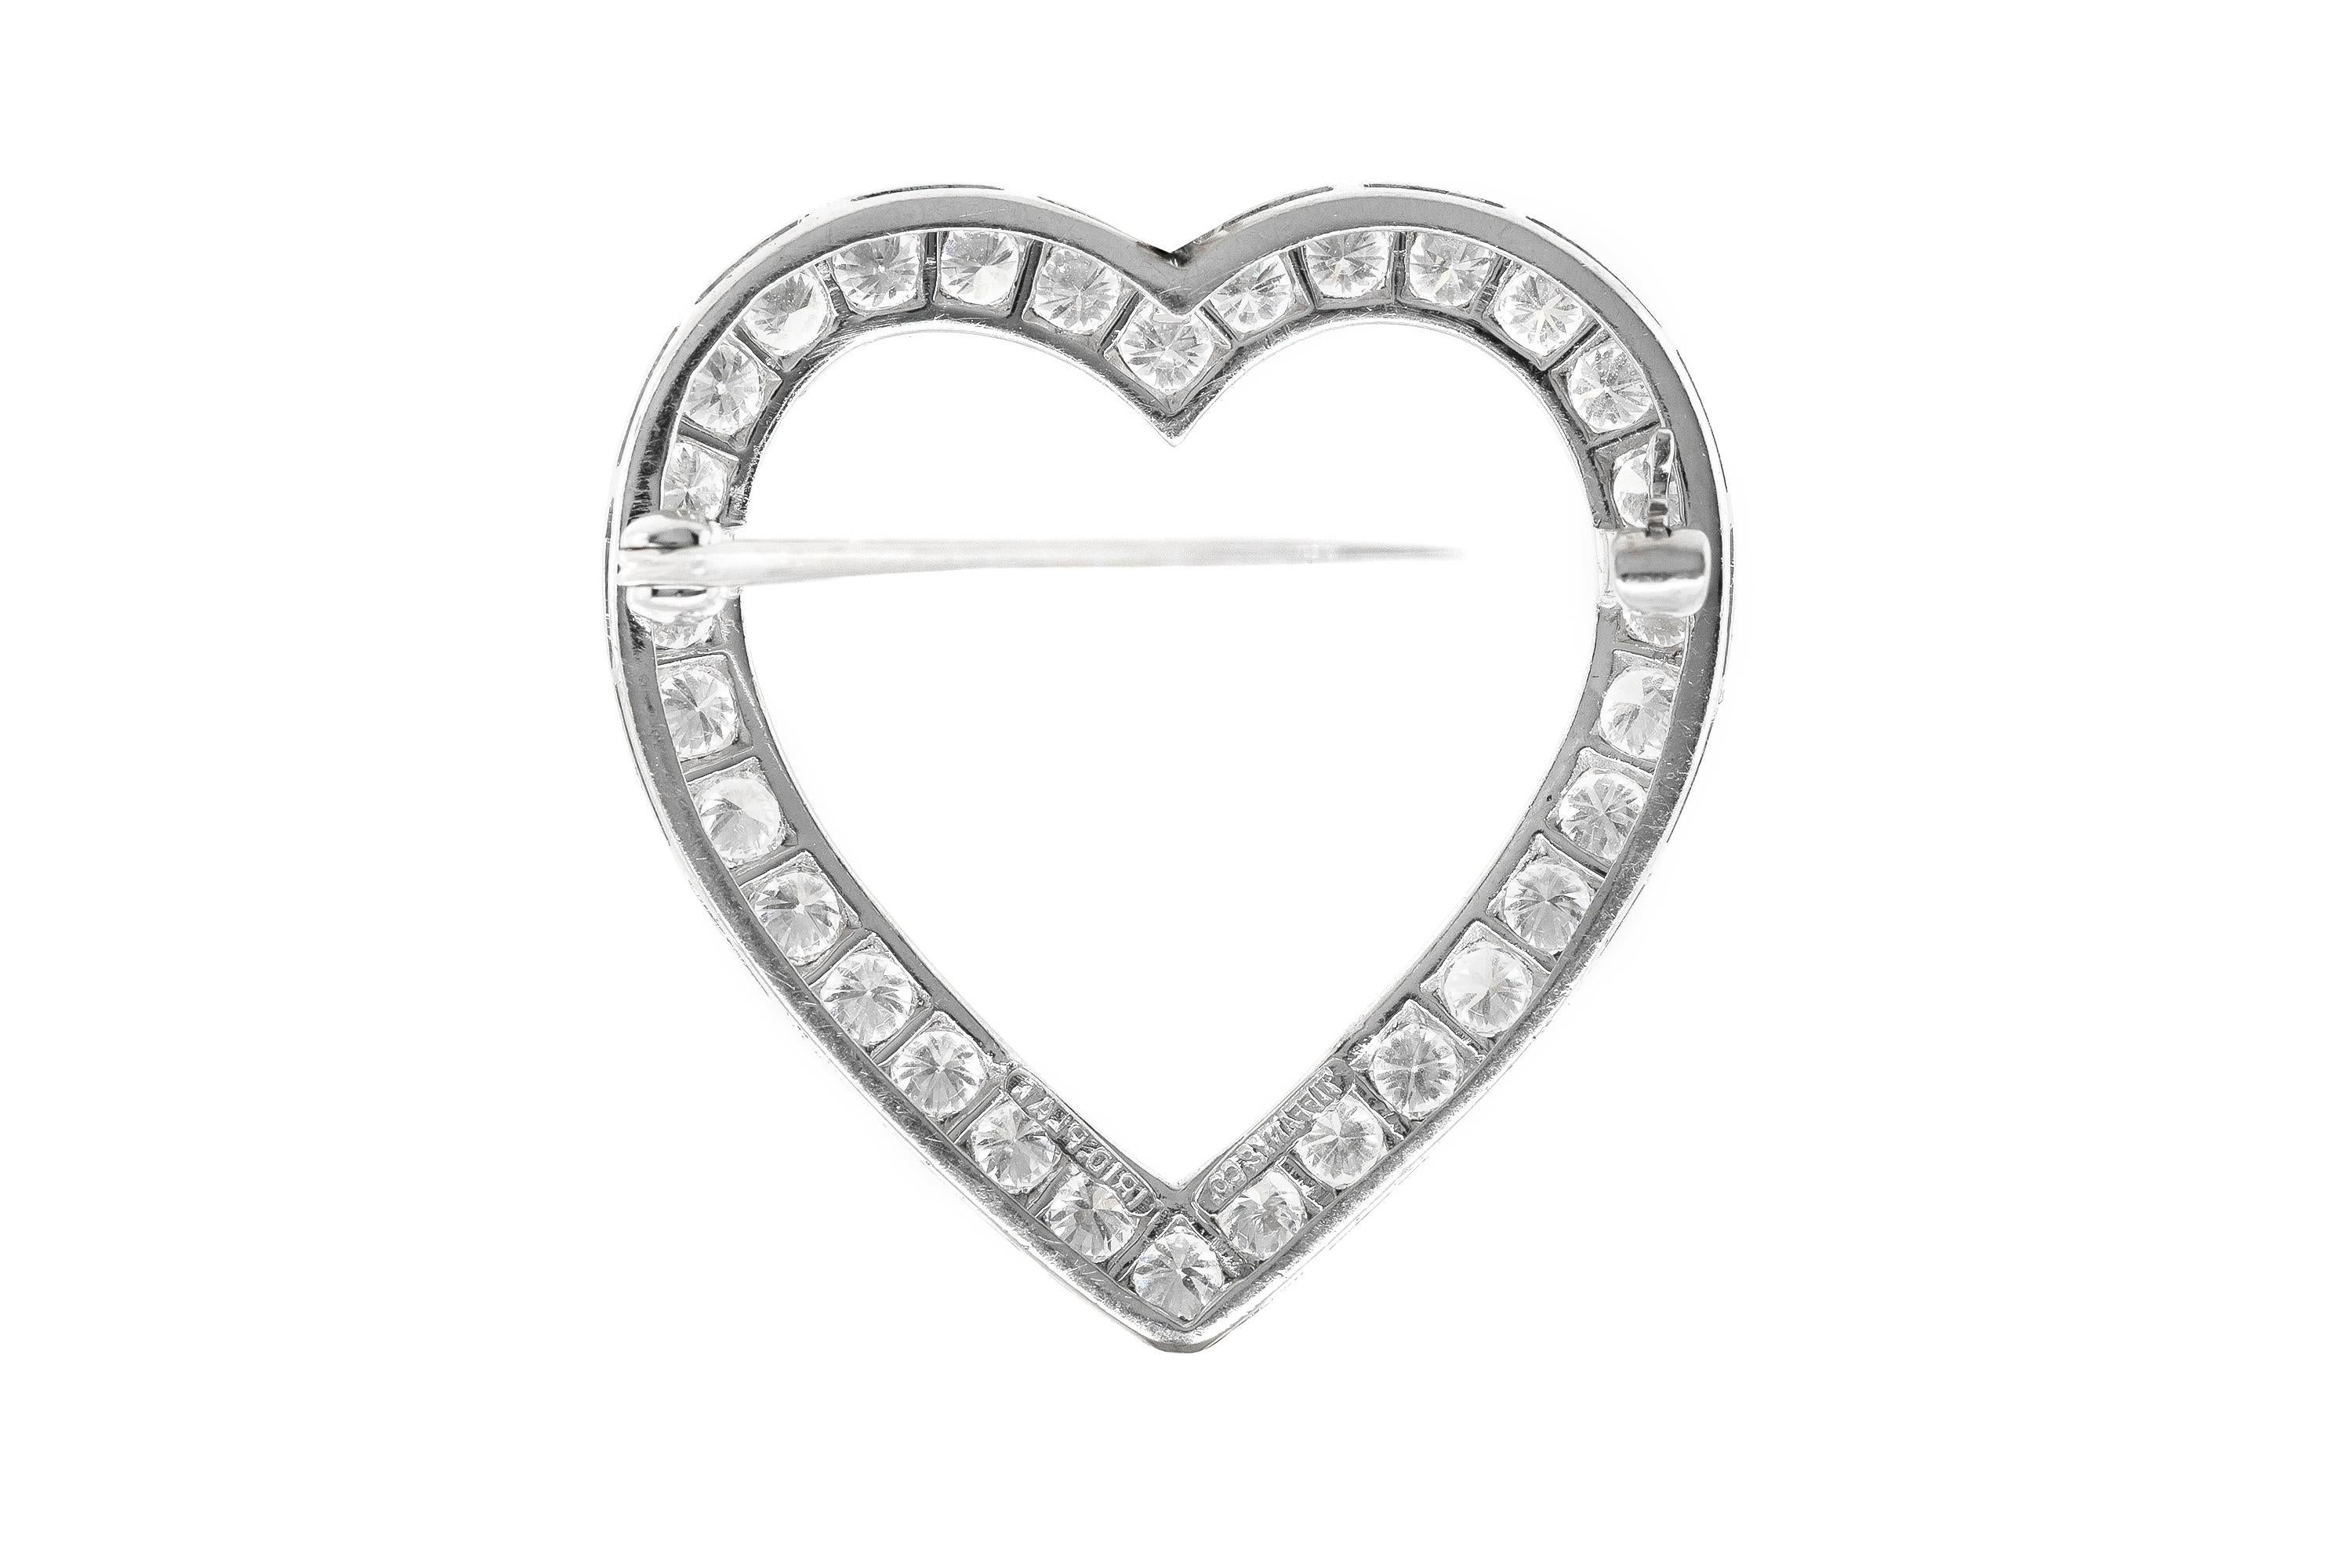 Finely crafted in platinum with round-brilliant cut diamonds weighing a total of approximately 3.00 carats.
Signed by Tiffany & Co.
Dimensions: 1 ⅜  inch long x 1 ¼ inch wide